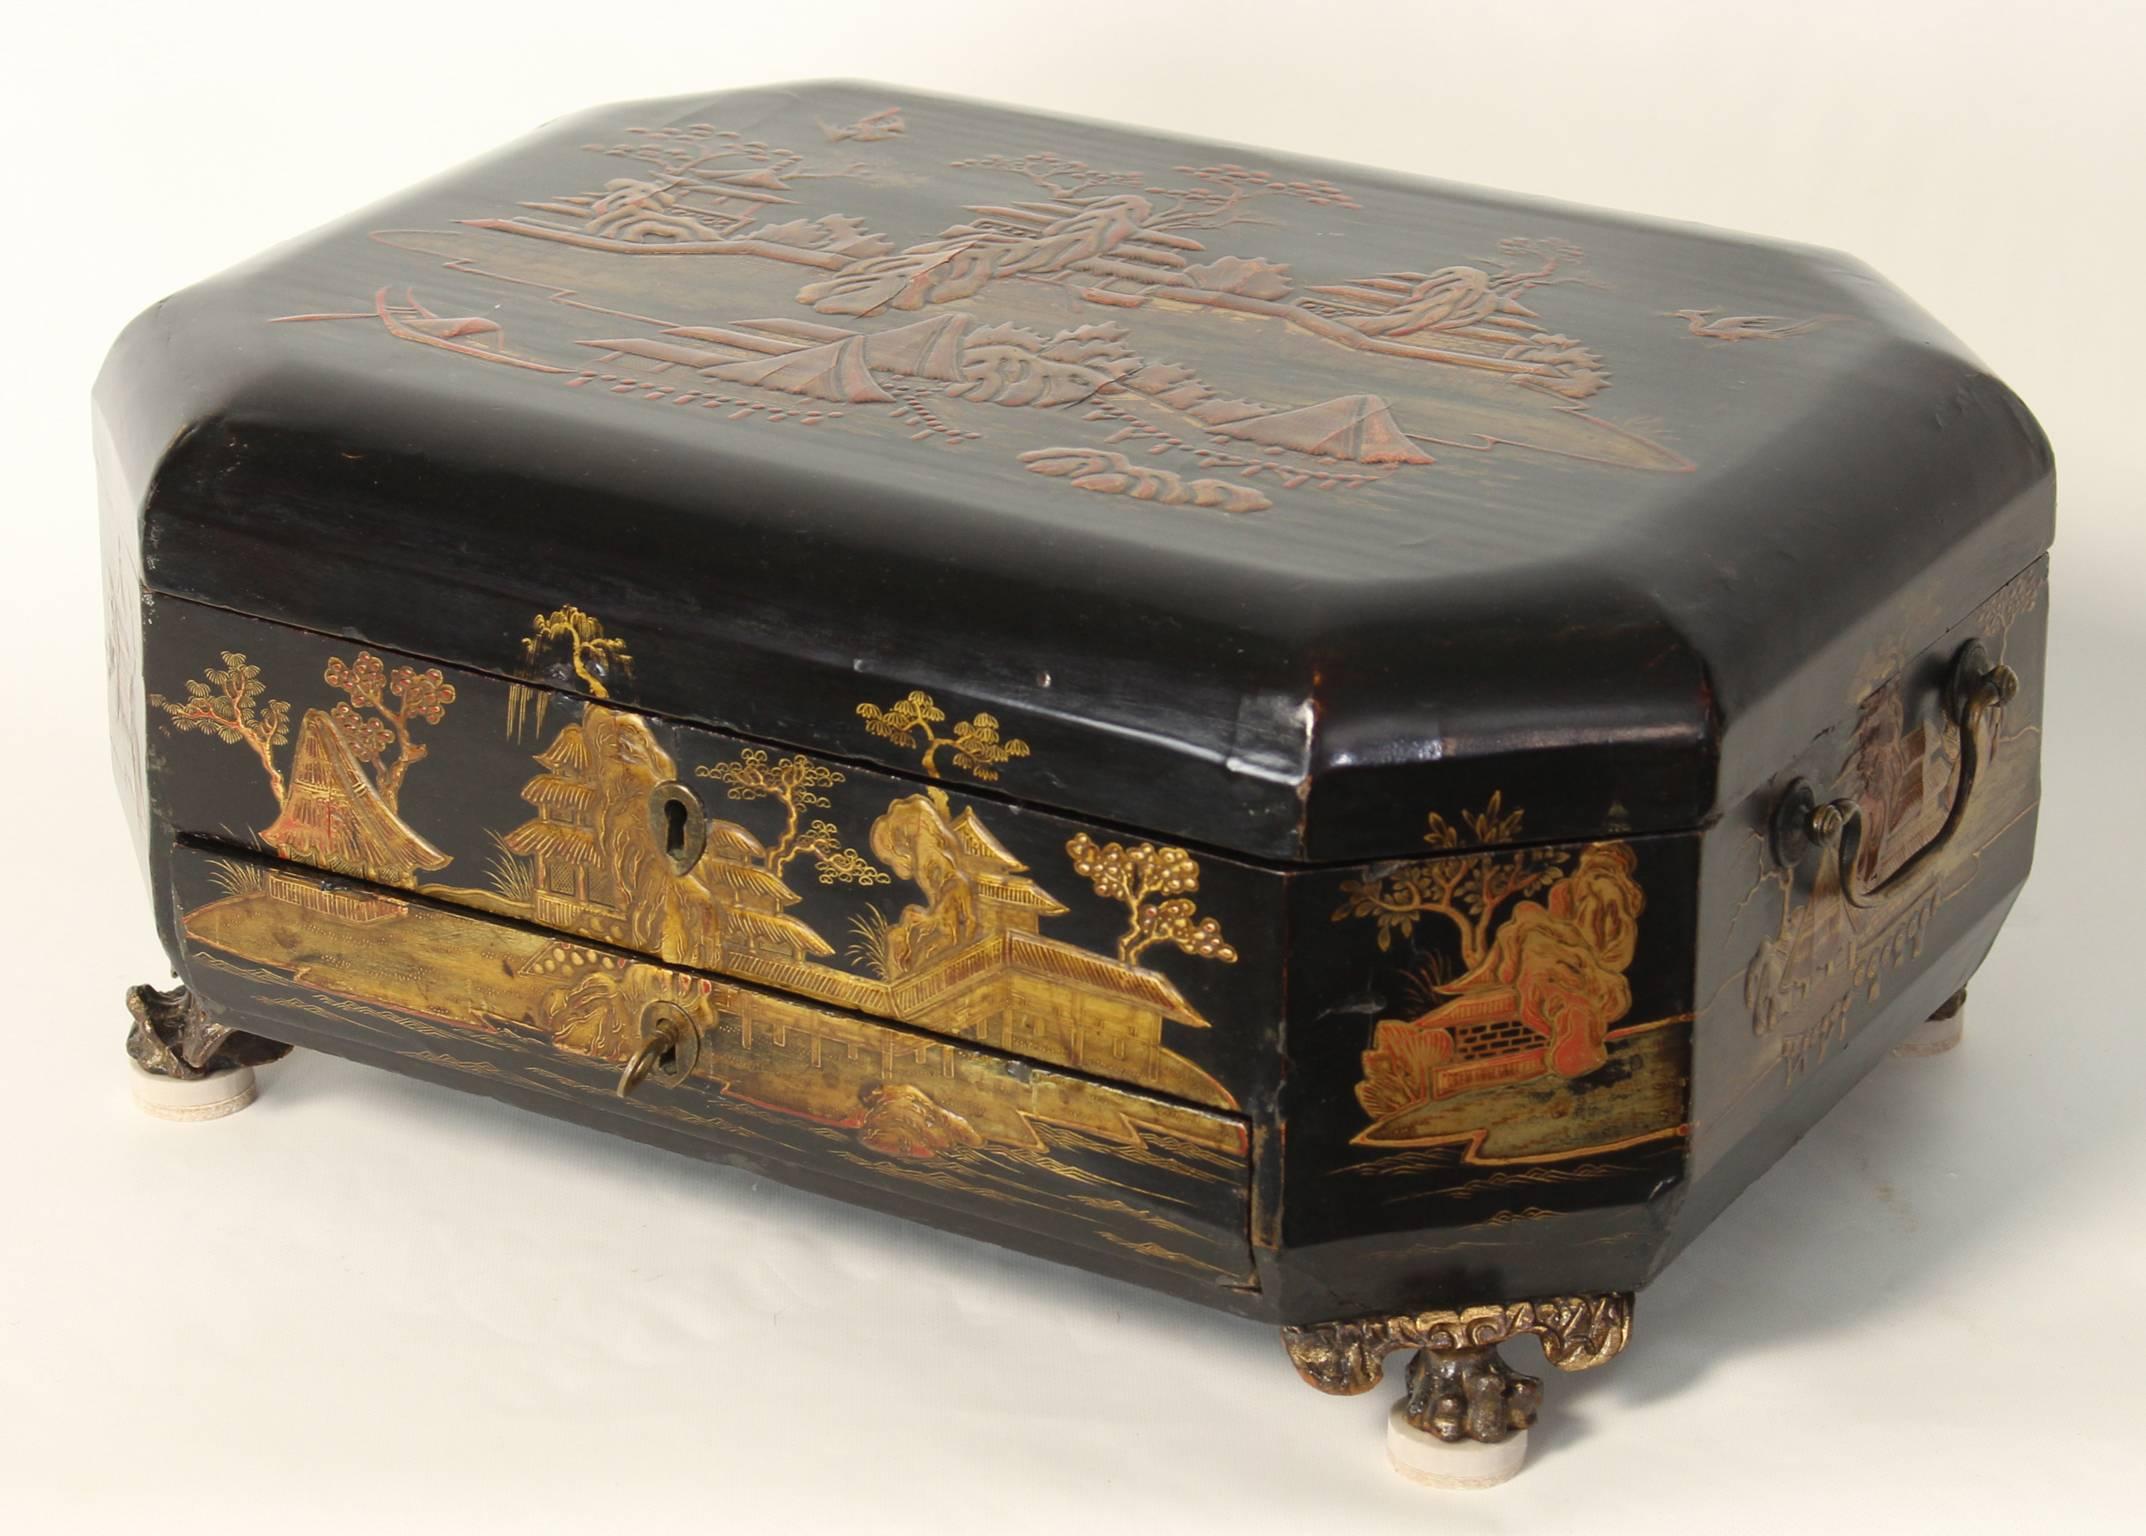 A mid-19th century black lacquer Chinese Export sewing box with traditional raised gilt decoration resting on carved paw feet.